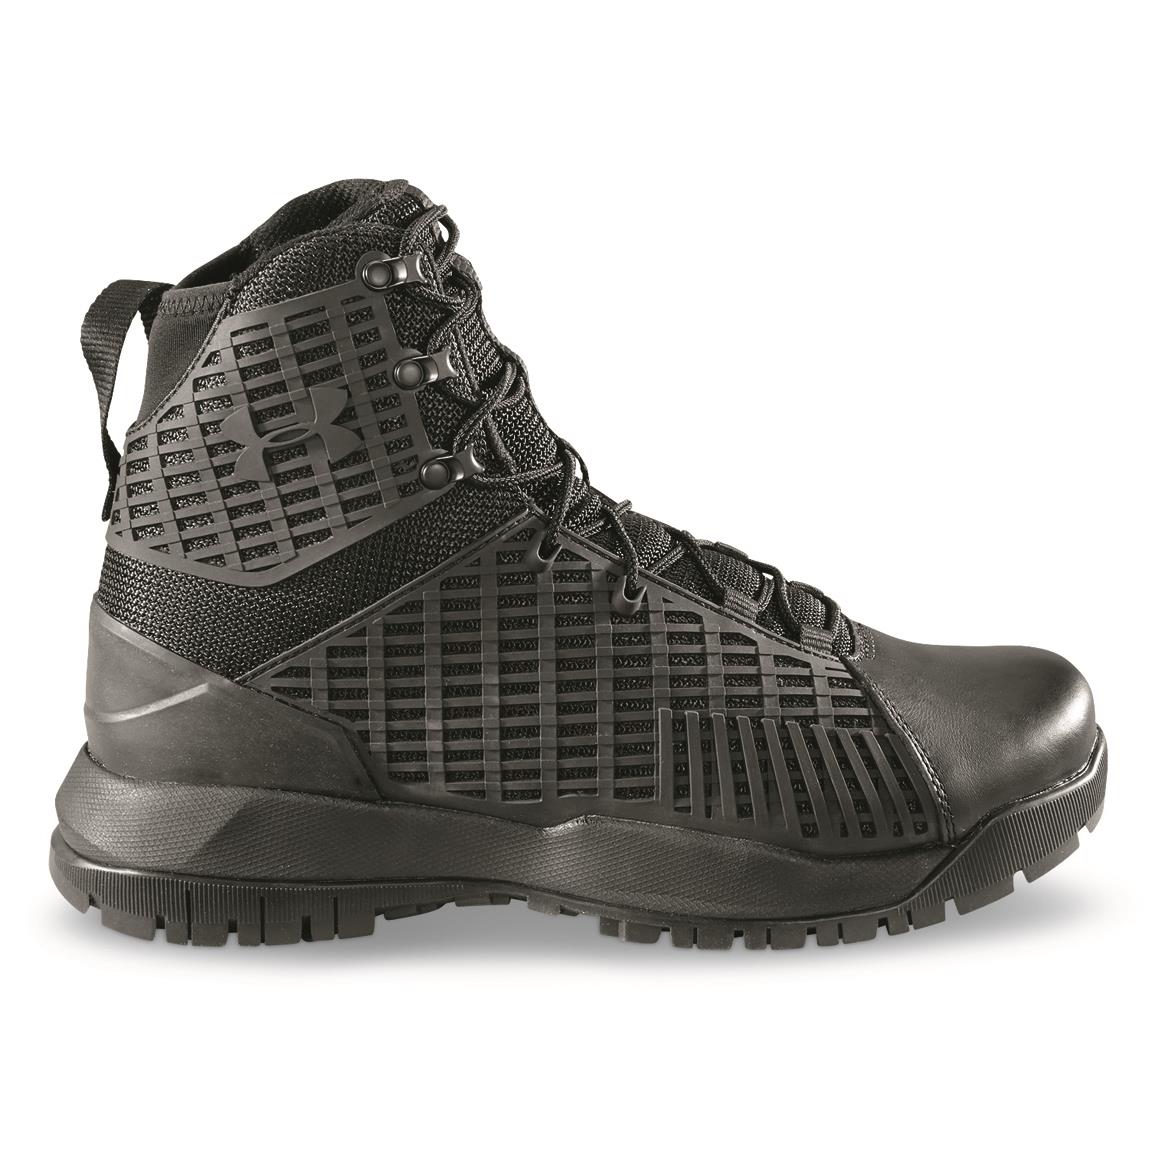 under armour stryker tactical boots